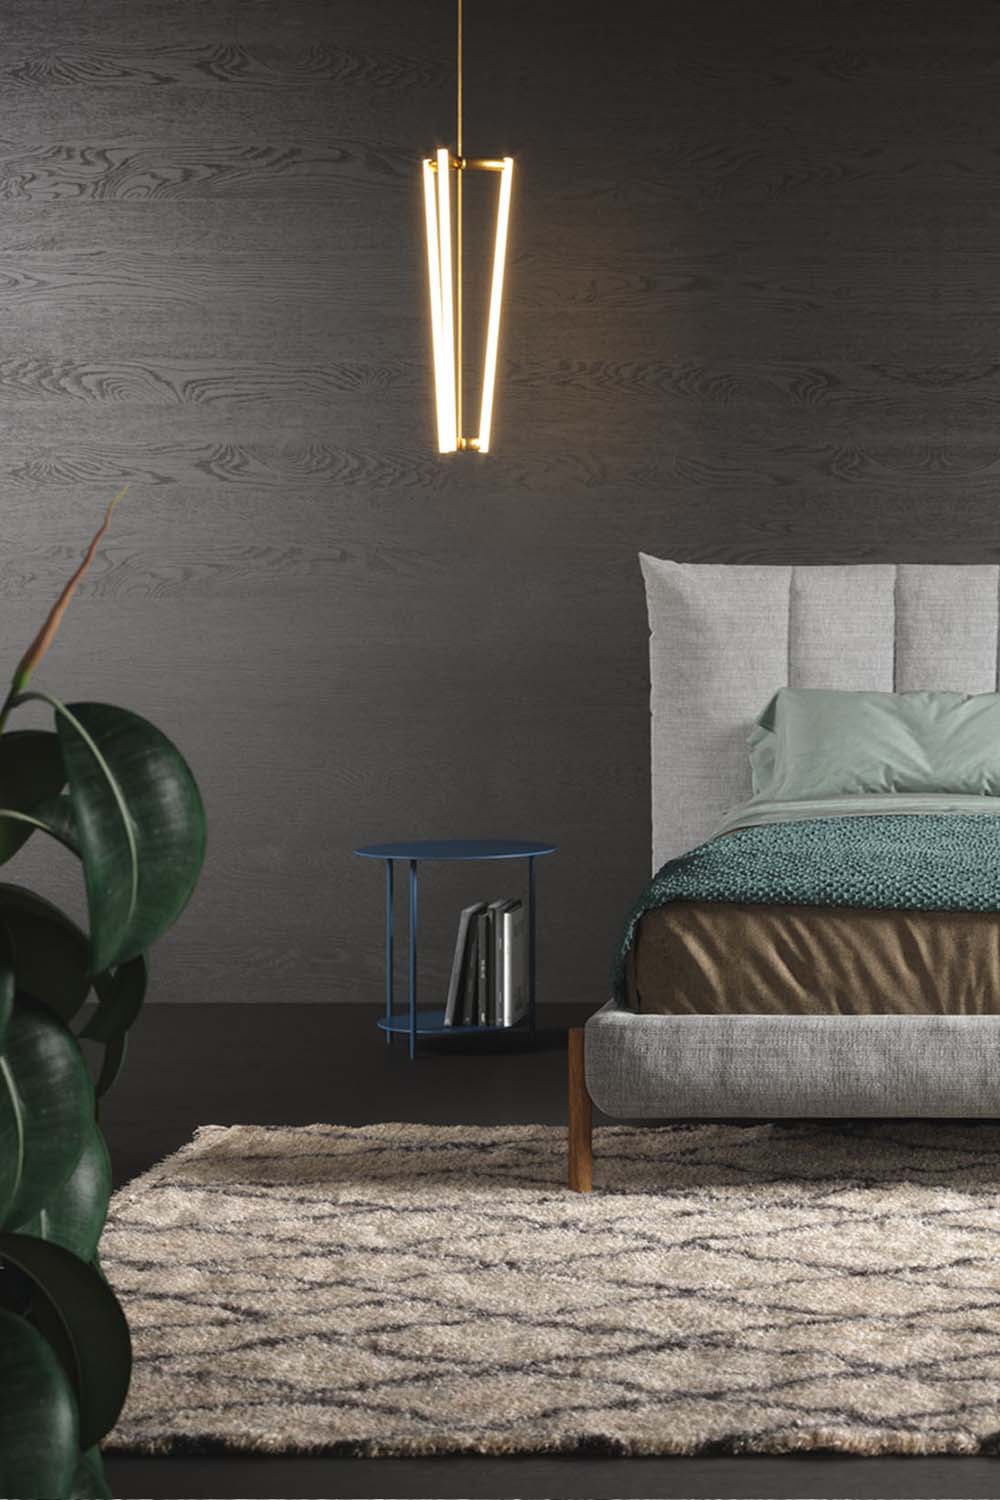 Groove luxury, modern, contemporary Italian bed by Novamobili. Sold by Krieder UK.